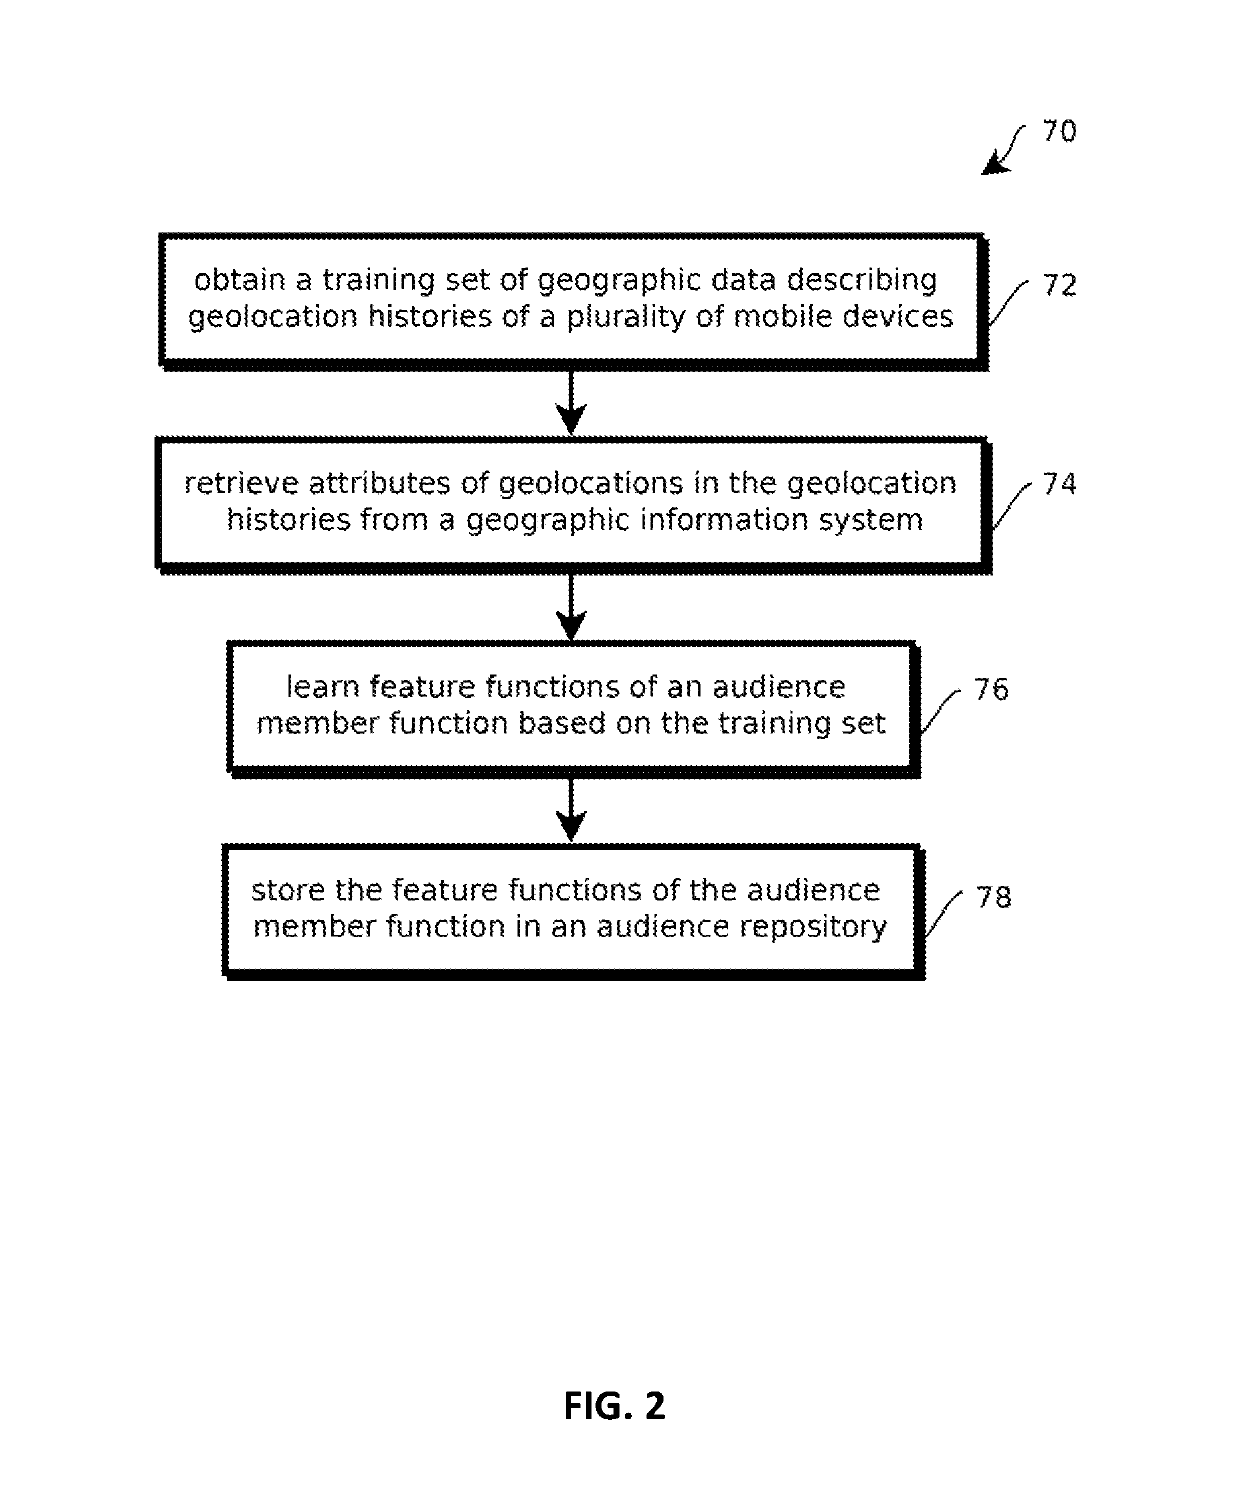 Inferring consumer affinities based on shopping behaviors with unsupervised machine learning models